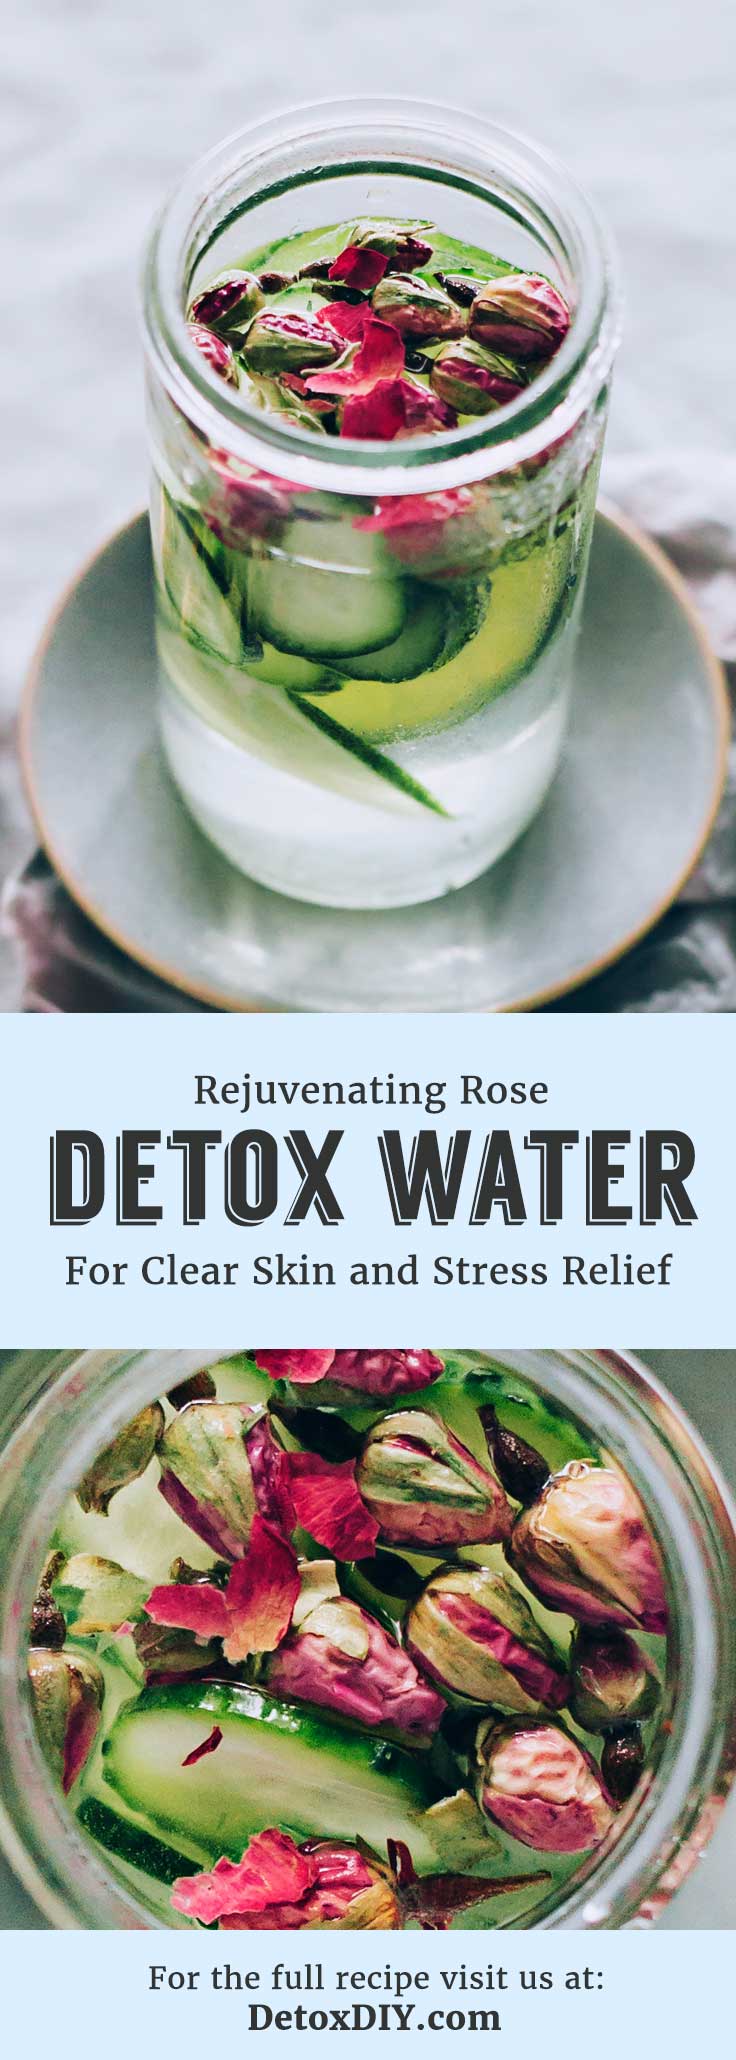 This rejuvenating rose water helps clear your skin and relieve stress. It is one of my favorite detox waters for when I want to just relax and unwind.